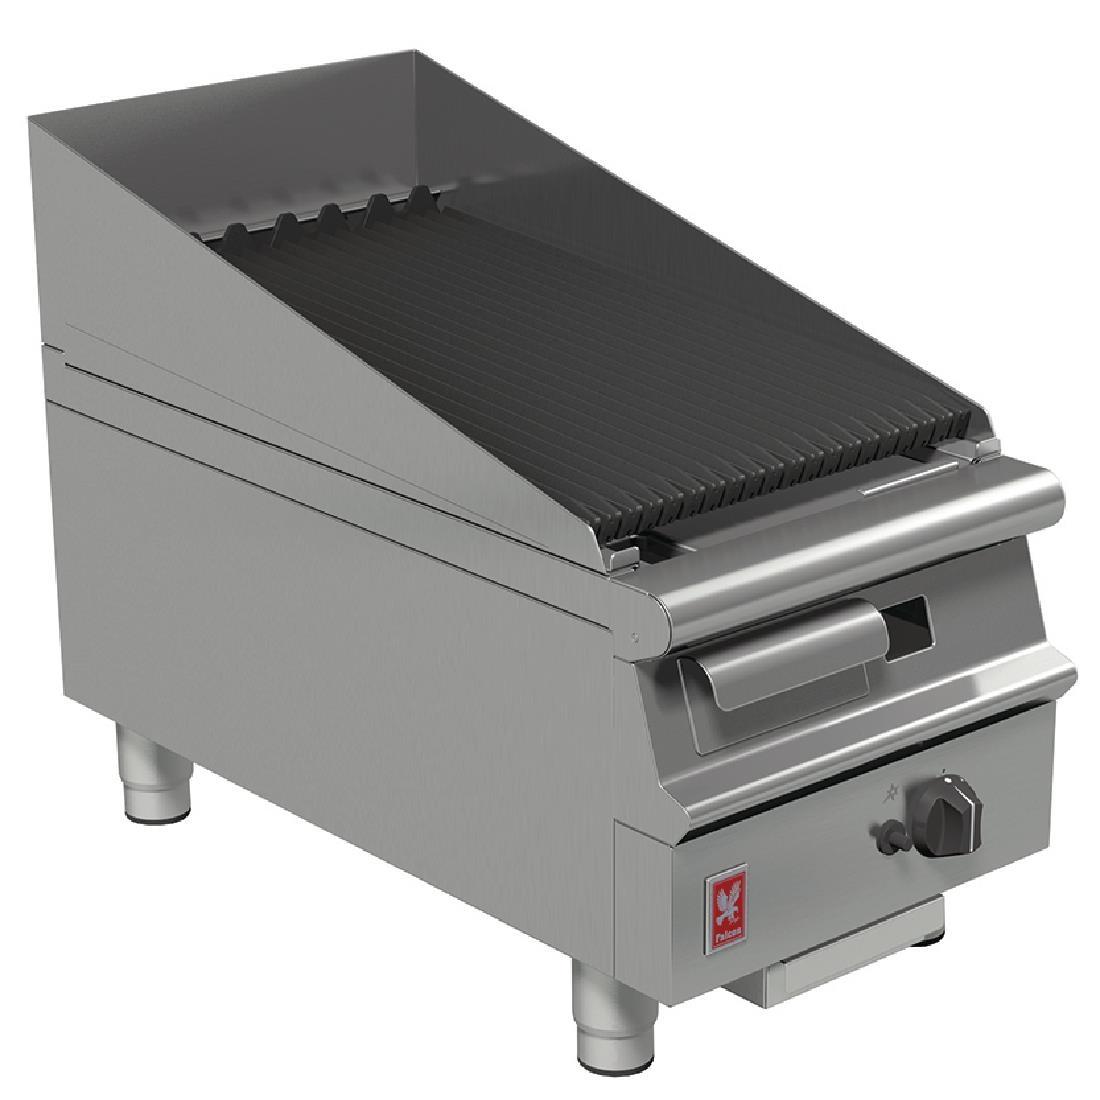 Falcon Dominator Plus Natural Gas Chargrill G3425 - GP023-N  - 1